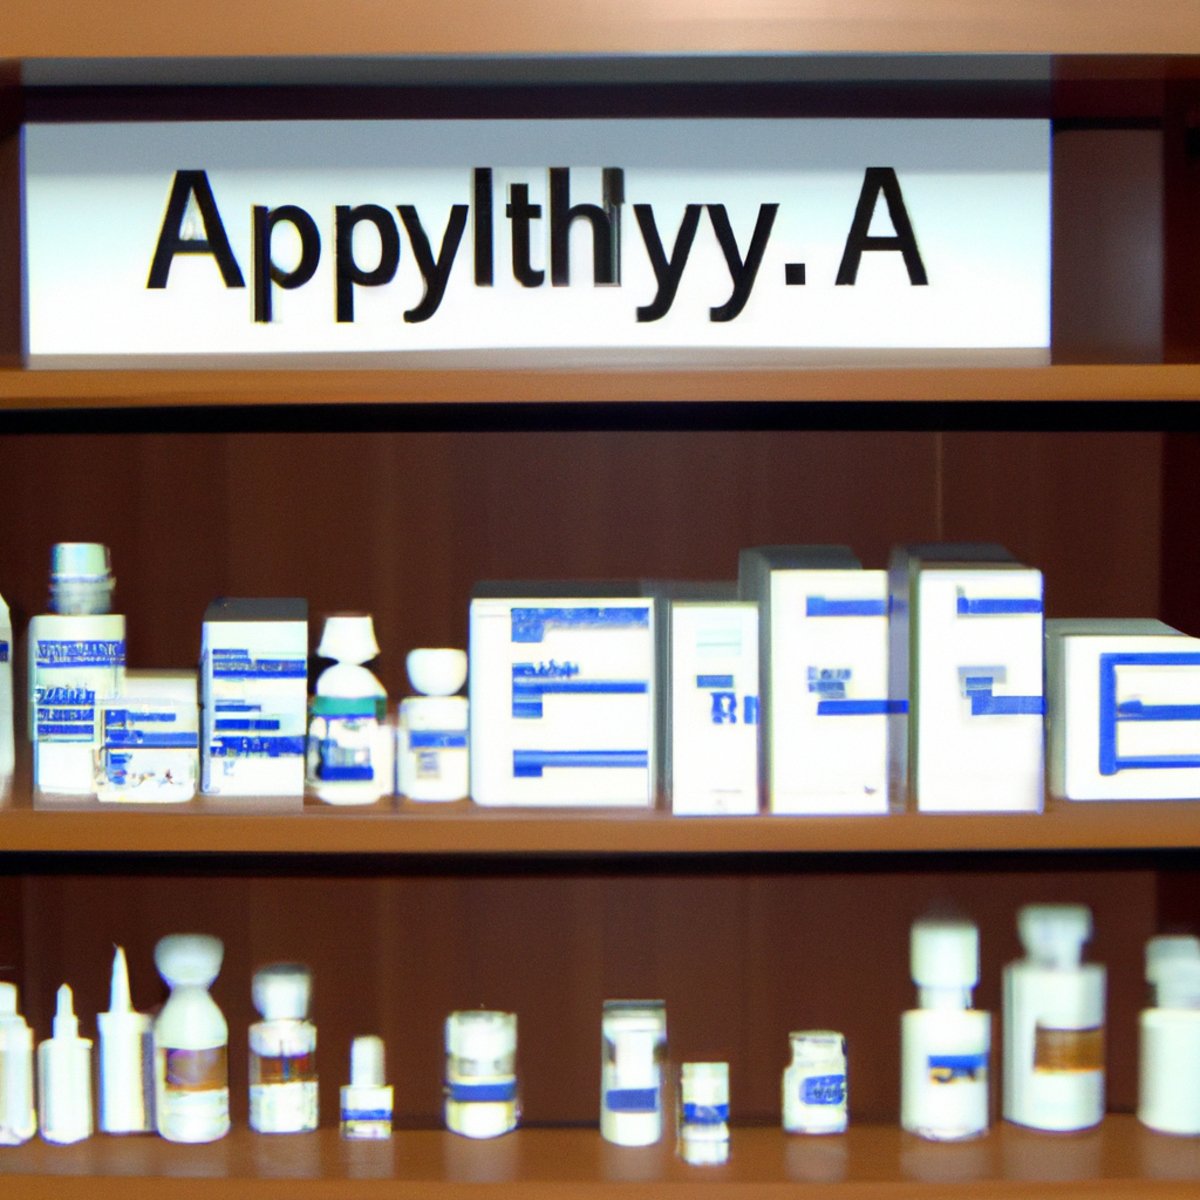 Well-organized medicine cabinet with prescription medications, inhalers, and medical devices for managing Alpha-1 Antitrypsin Deficiency.